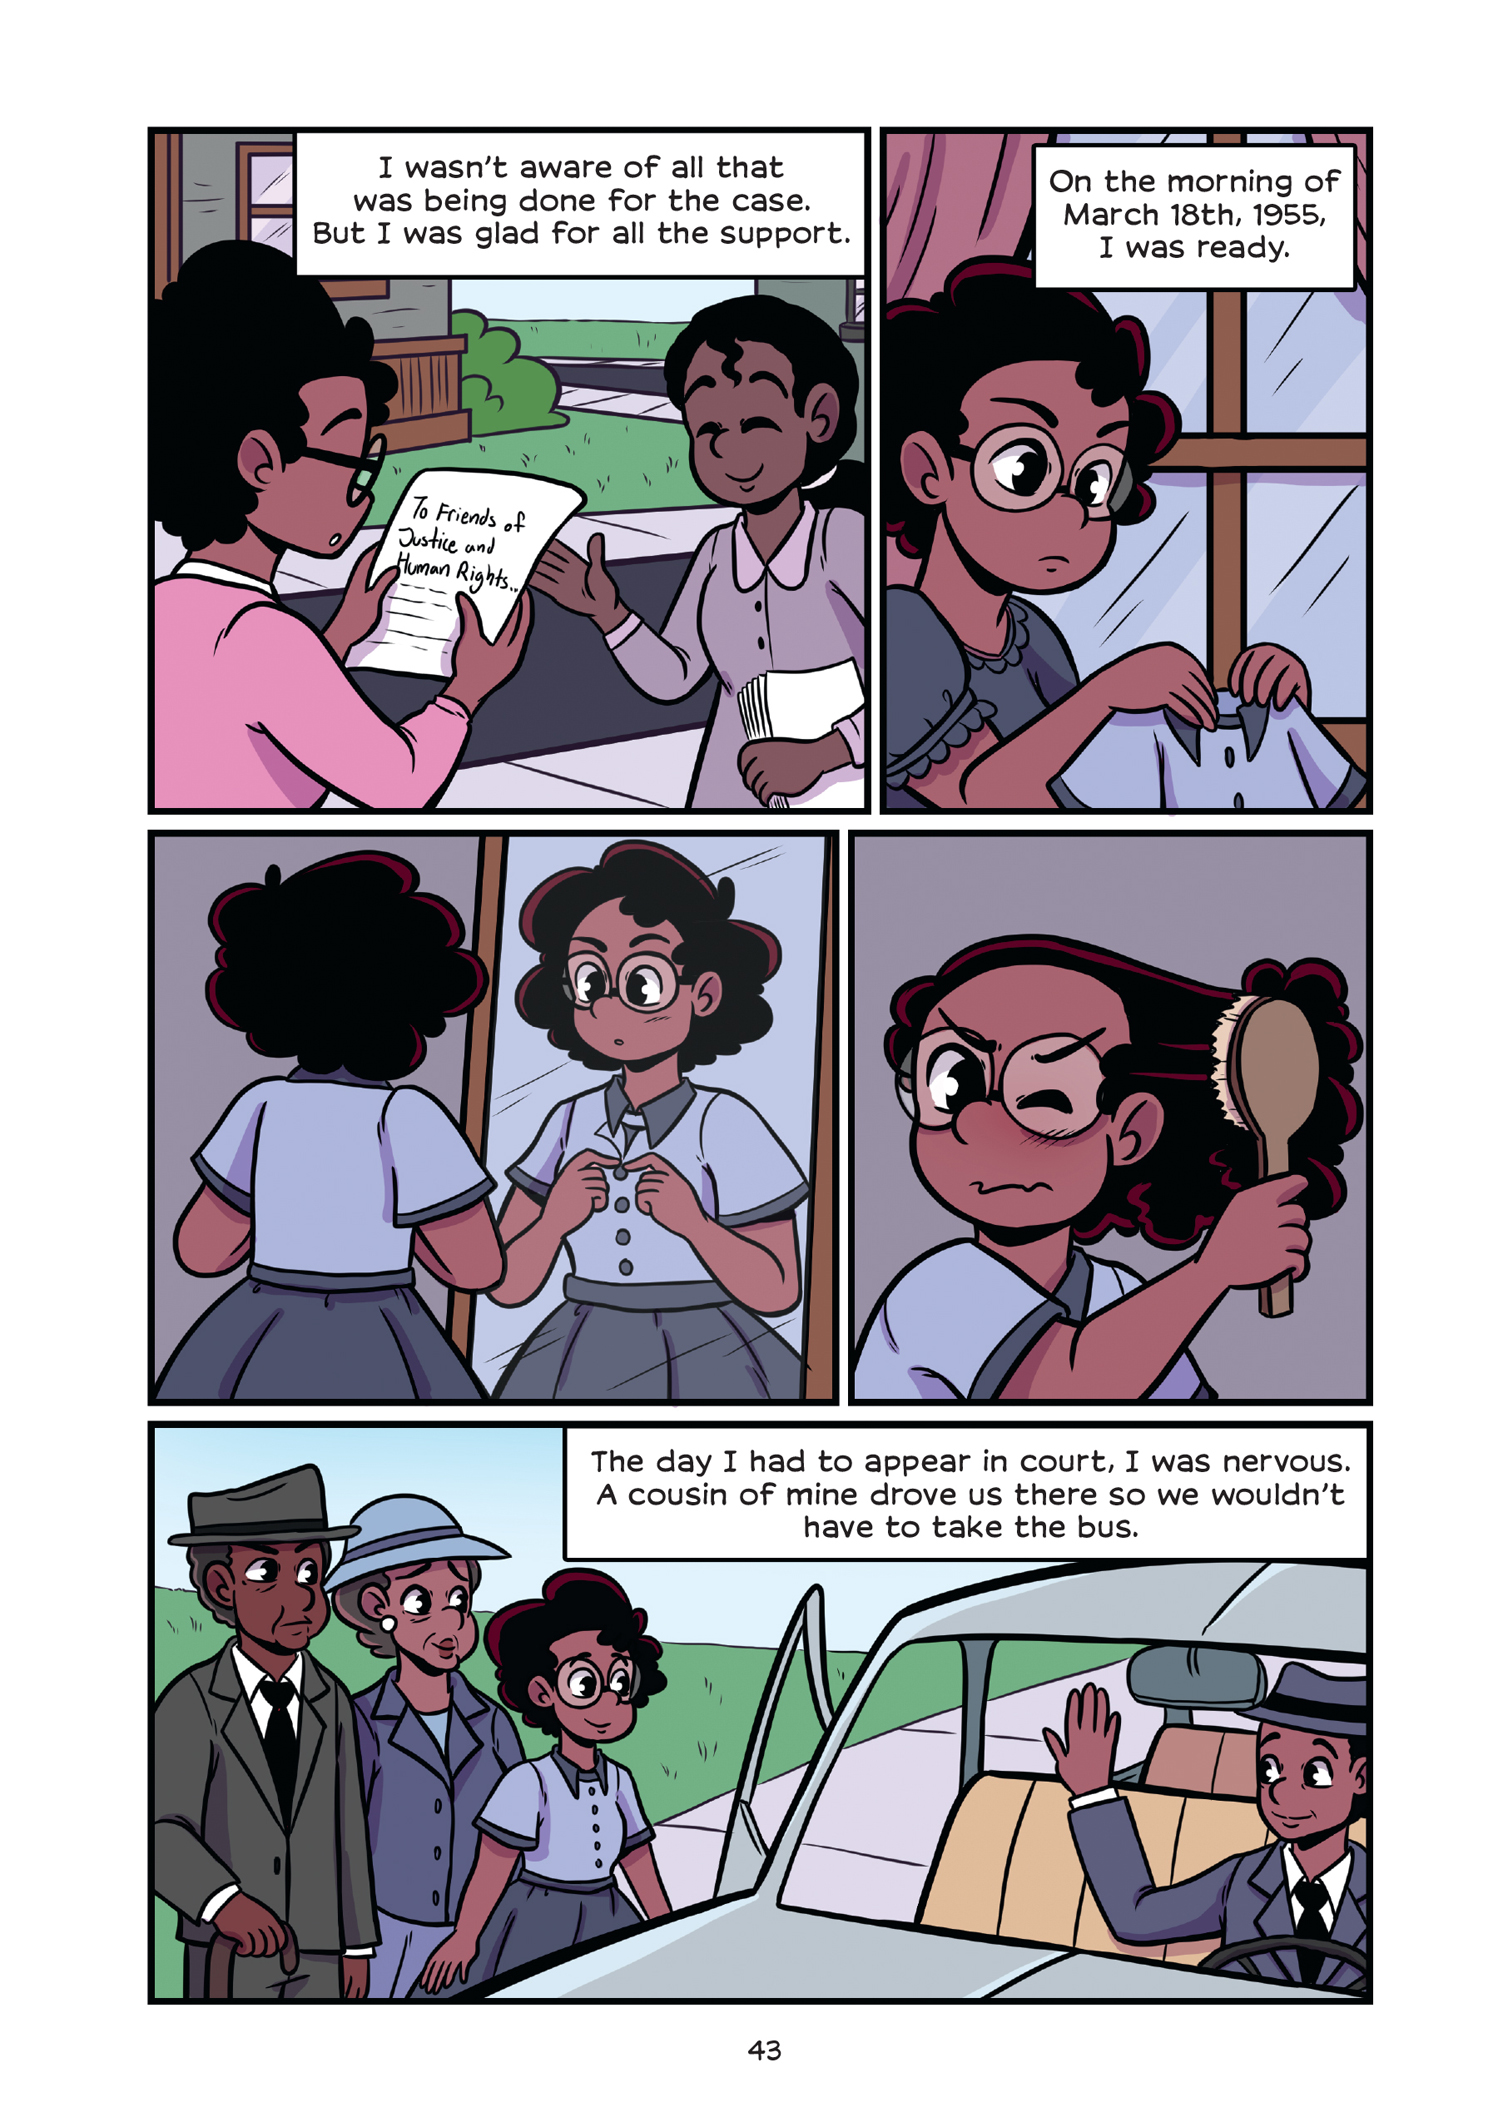 Read online History Comics comic -  Issue # Rosa Parks & Claudette Colvin - Civil Rights Heroes - 48